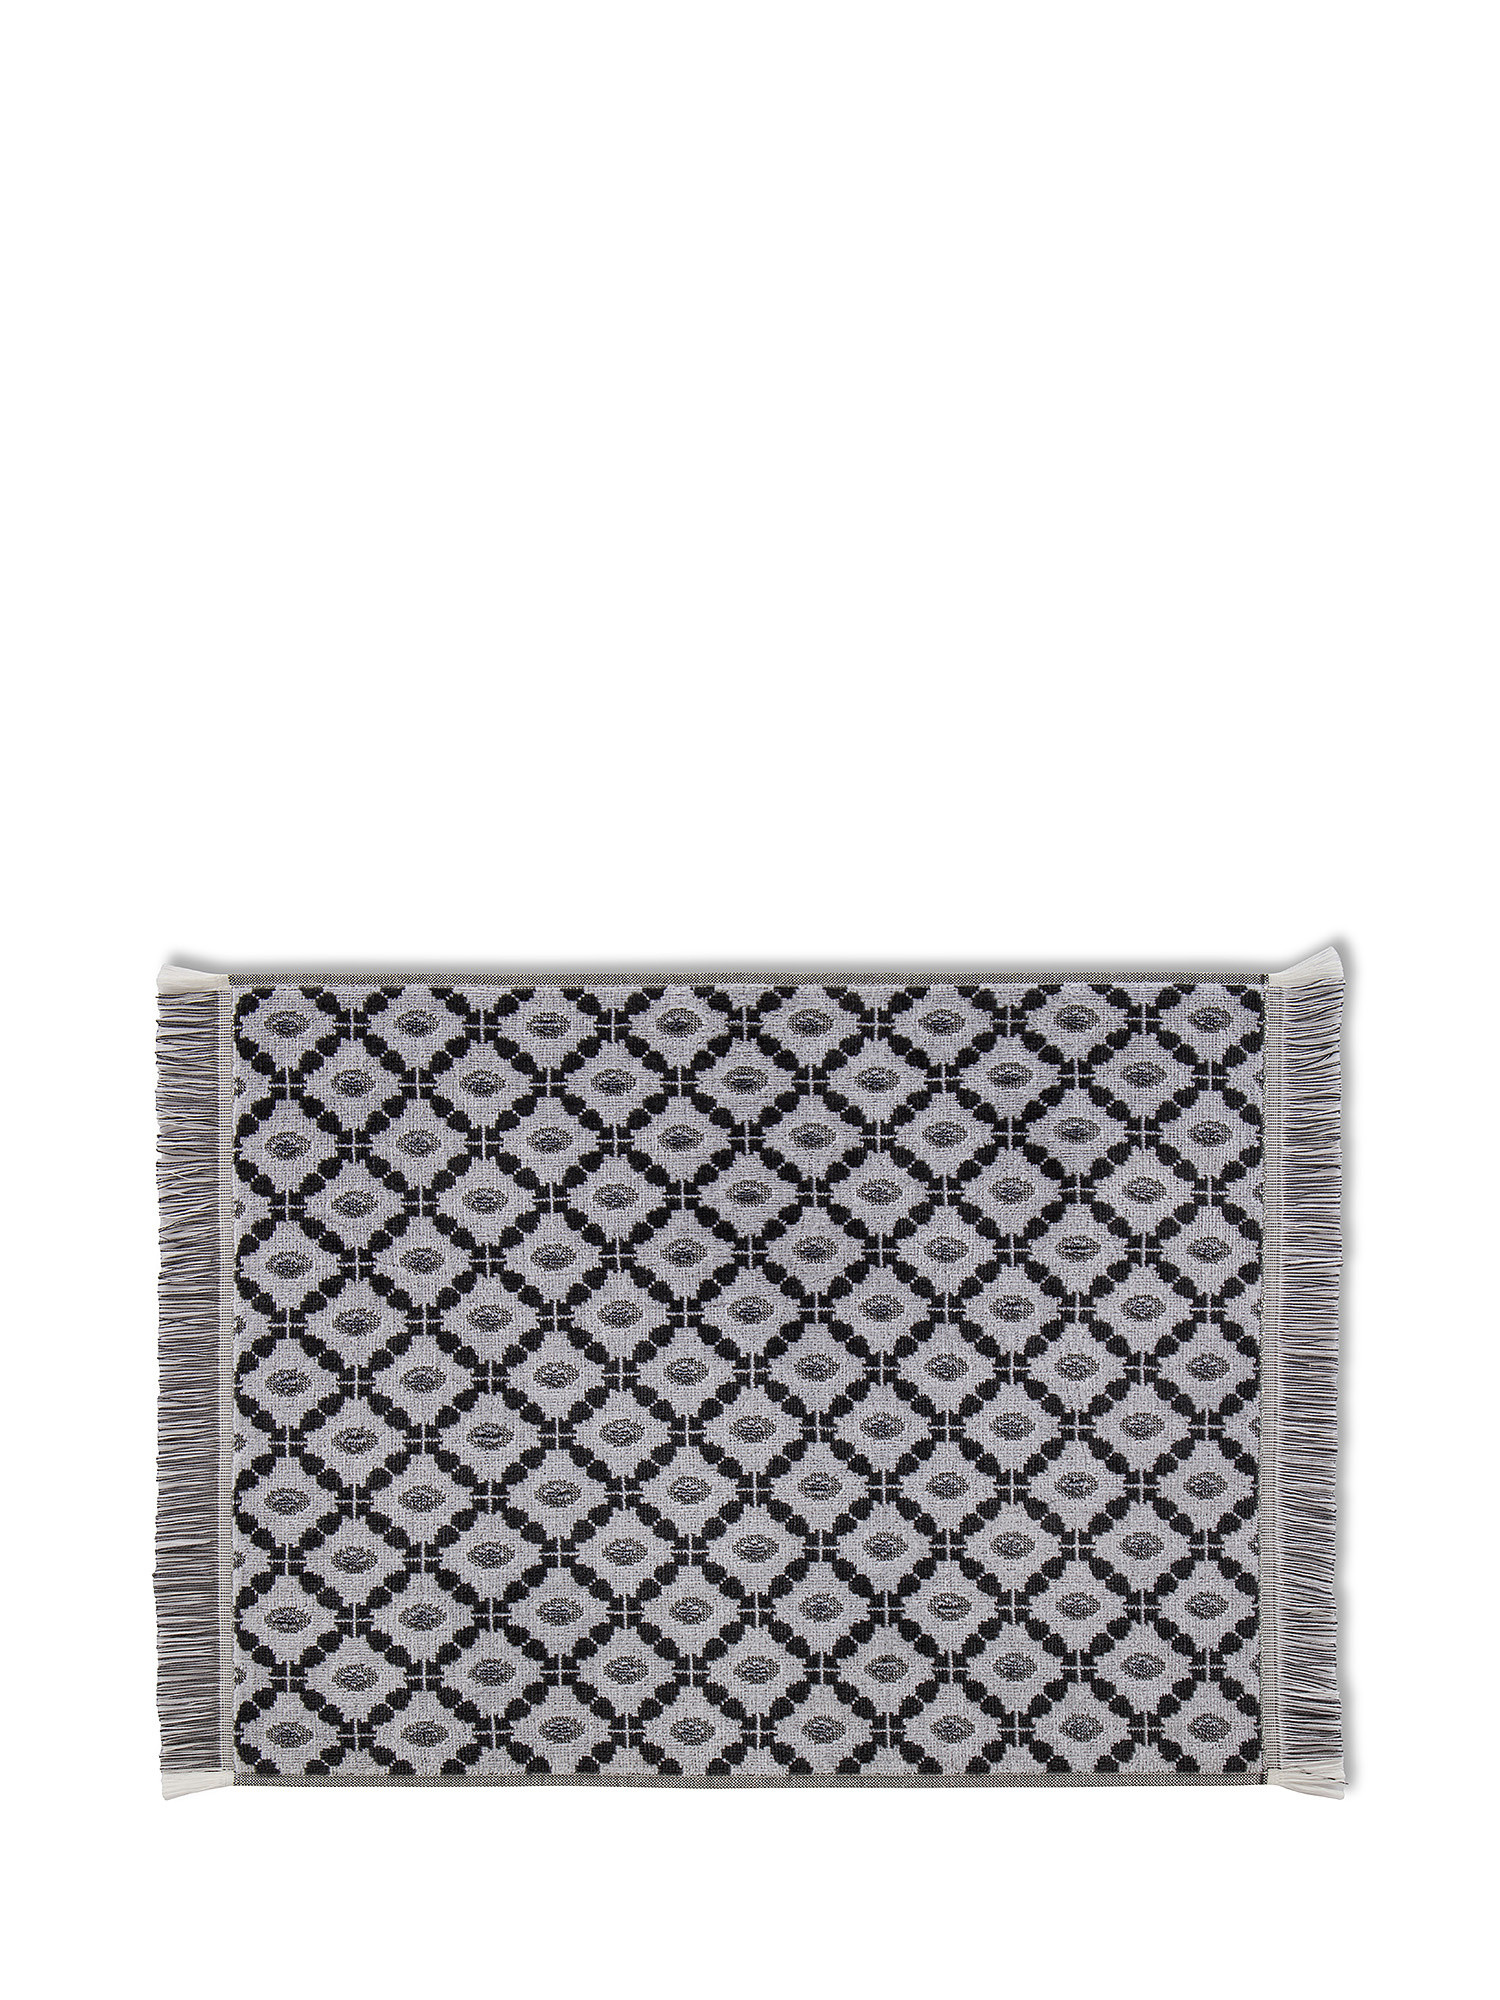 Cotton velor towel with diamond pattern, Black, large image number 1